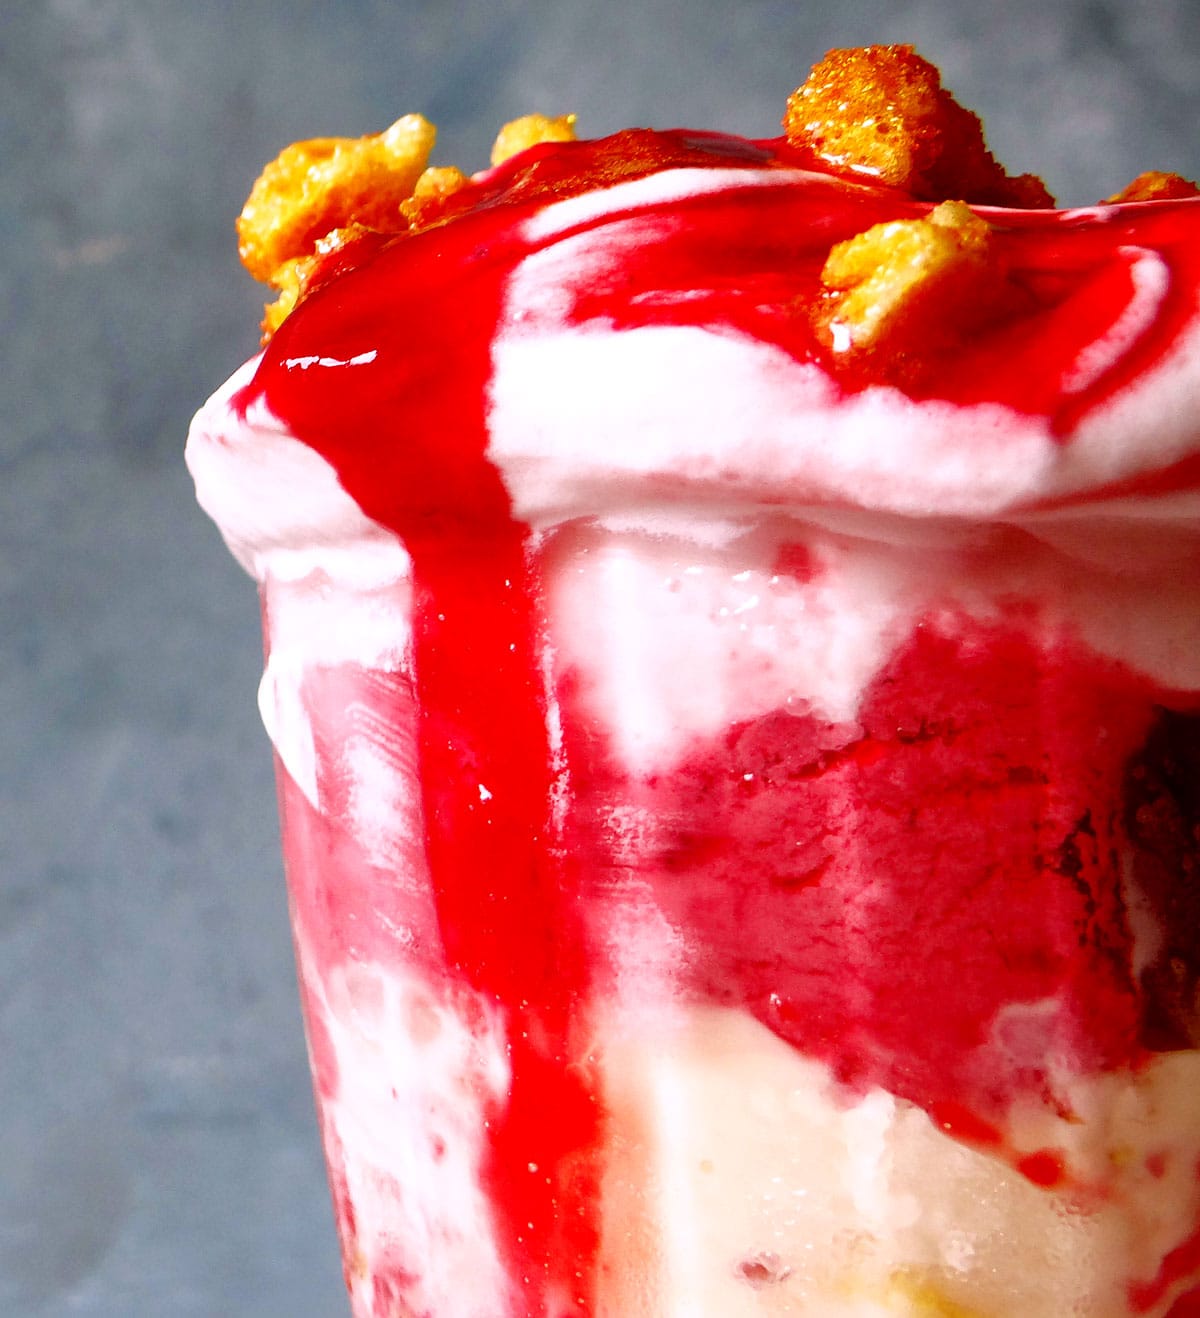 raspberry coulis drizzled on top of knickerbocker glory sundae